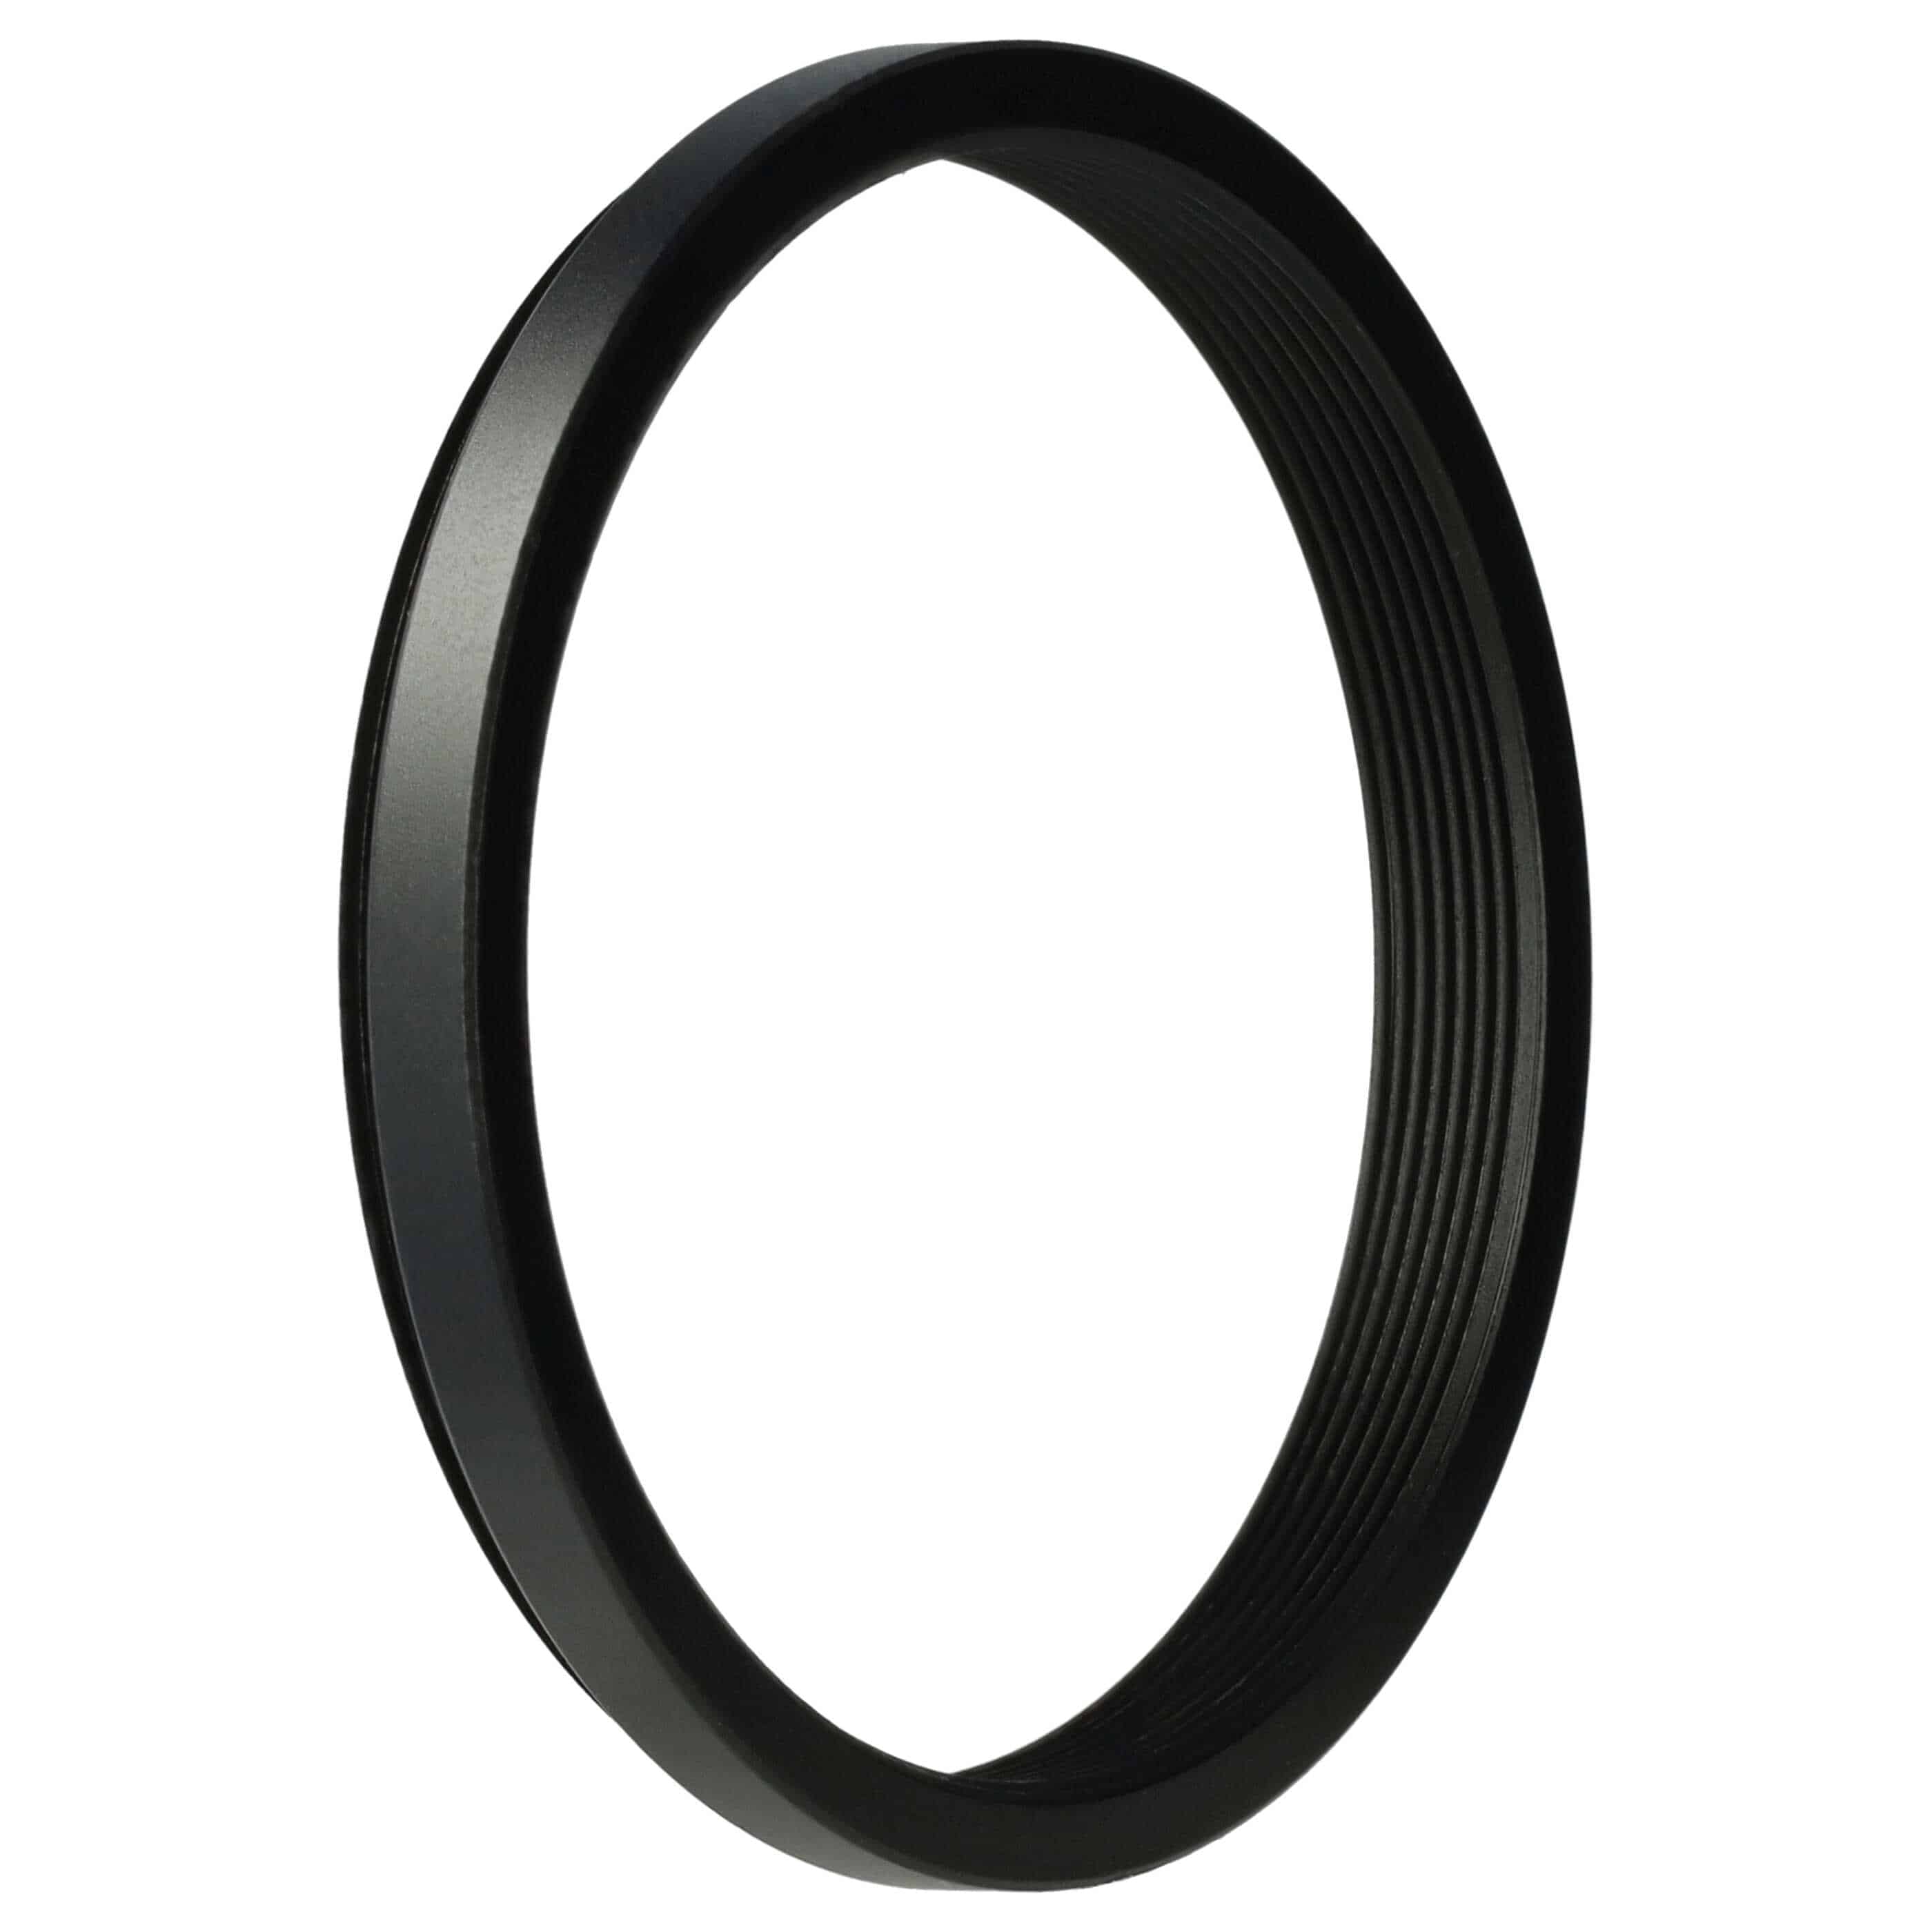 Step-Down Ring Adapter from 49 mm to 46 mm suitable for Camera Lens - Filter Adapter, metal